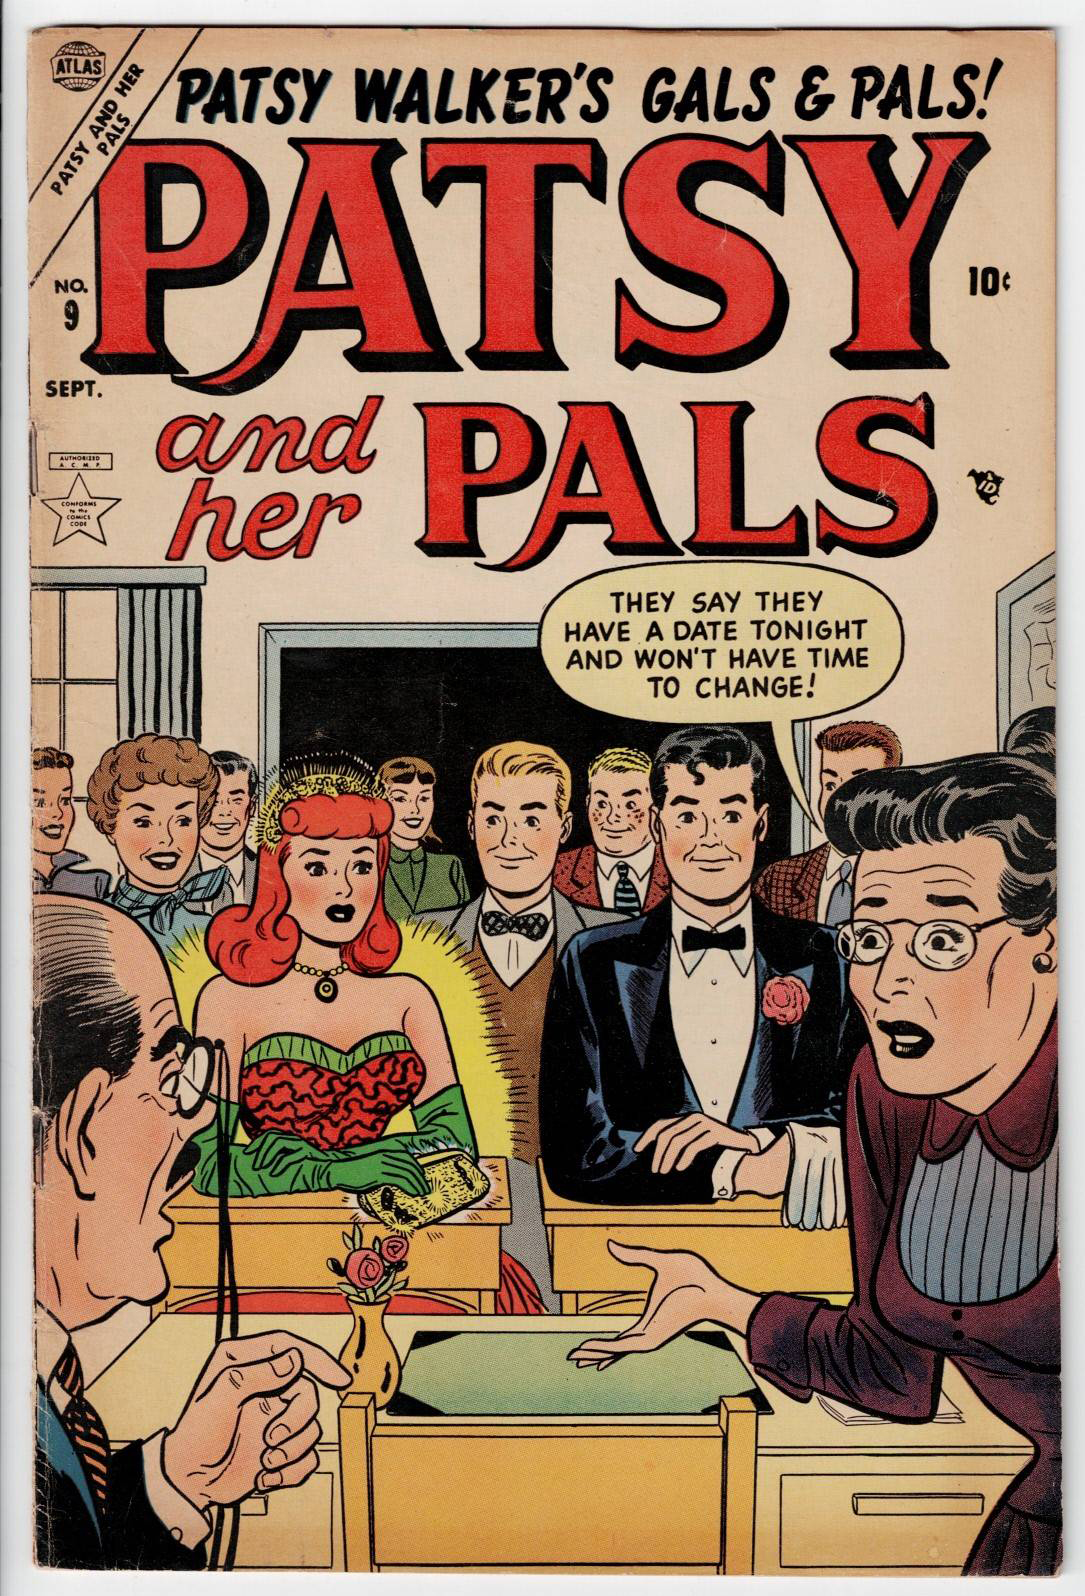 Patsy and her Pals #9 front